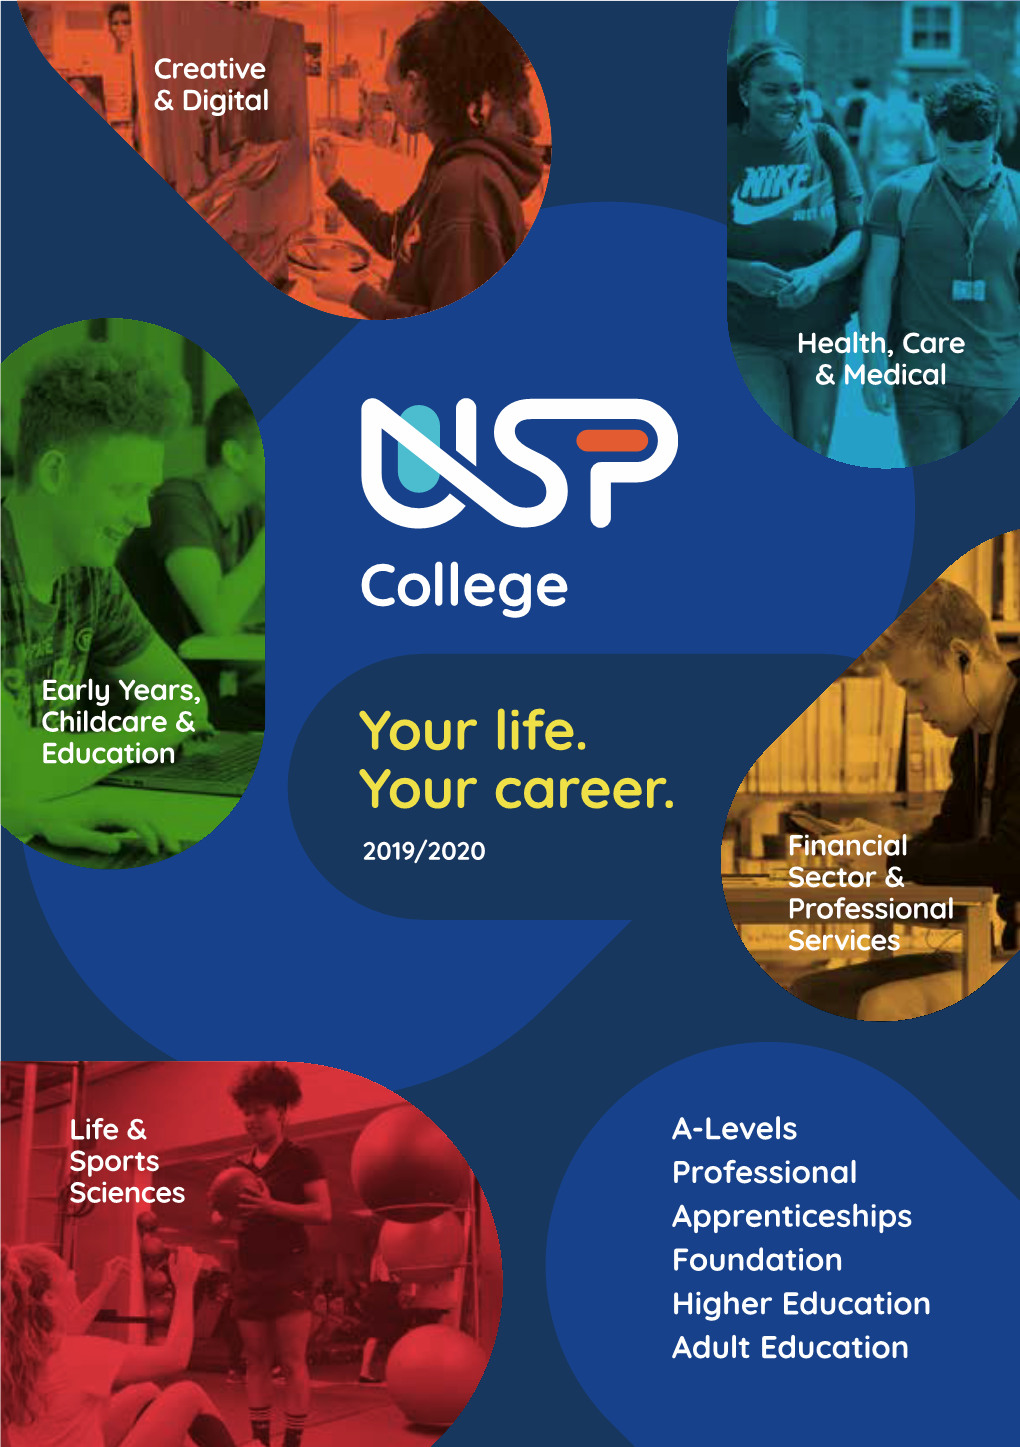 Your Life. Your Career. 2019/2020 Financial Sector & Professional Services